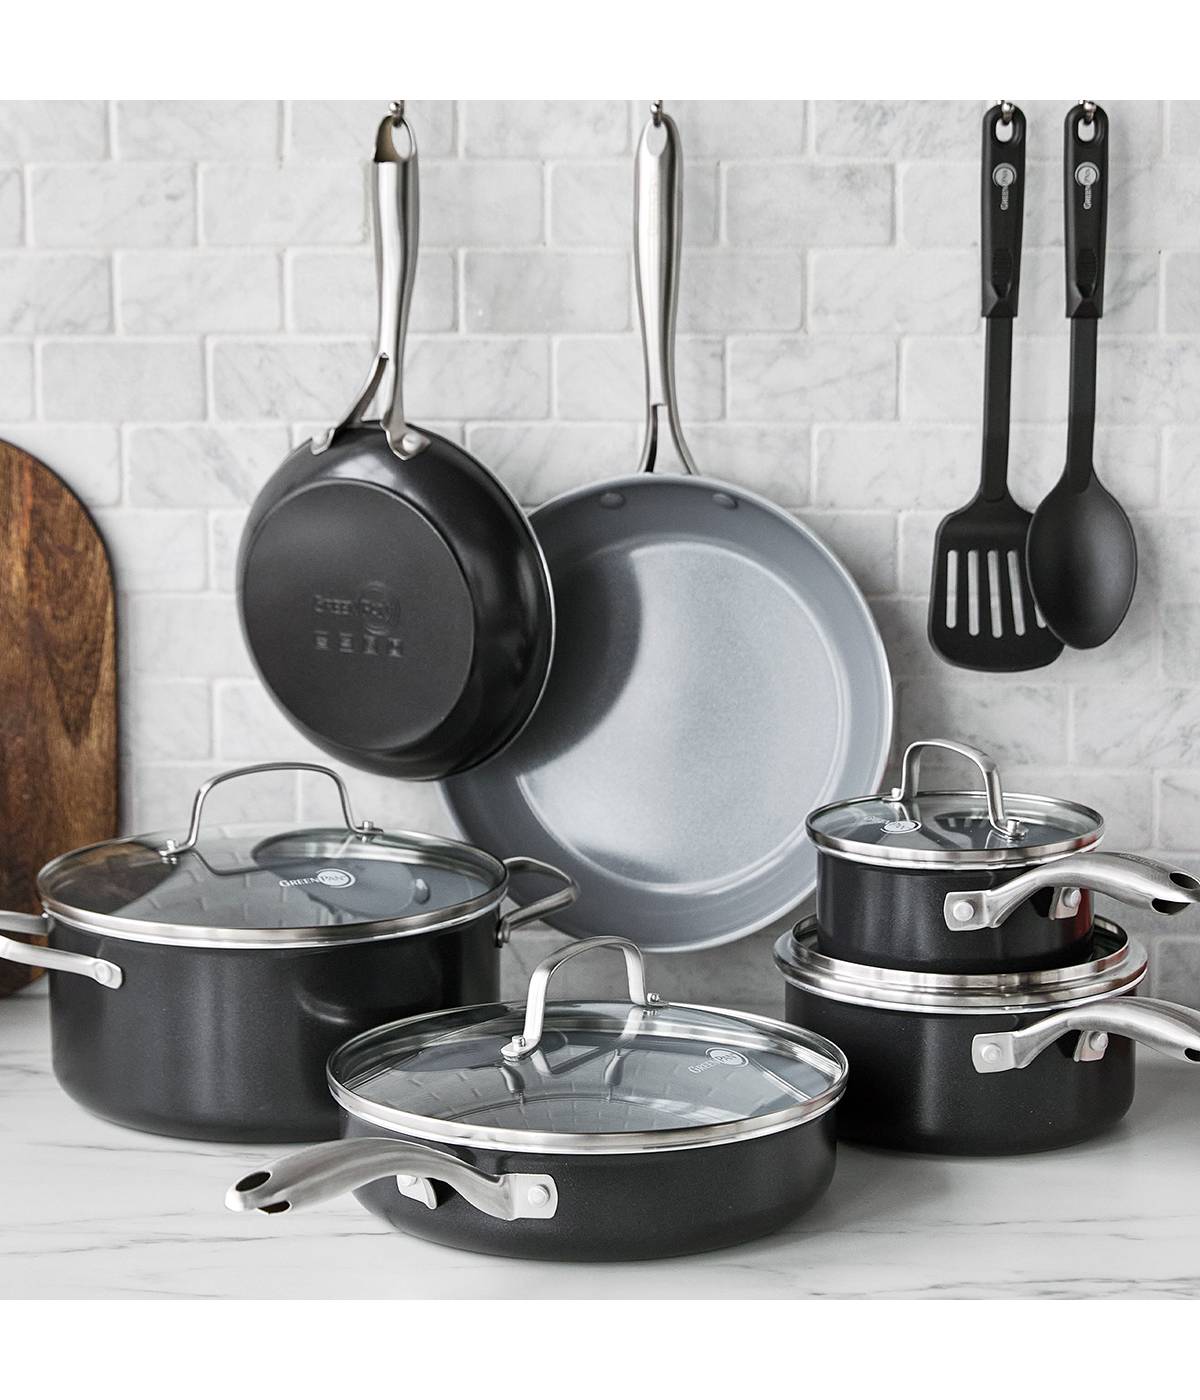 GreenPan Swift Collection Ceramic Nonstick Cookware Set; image 2 of 2